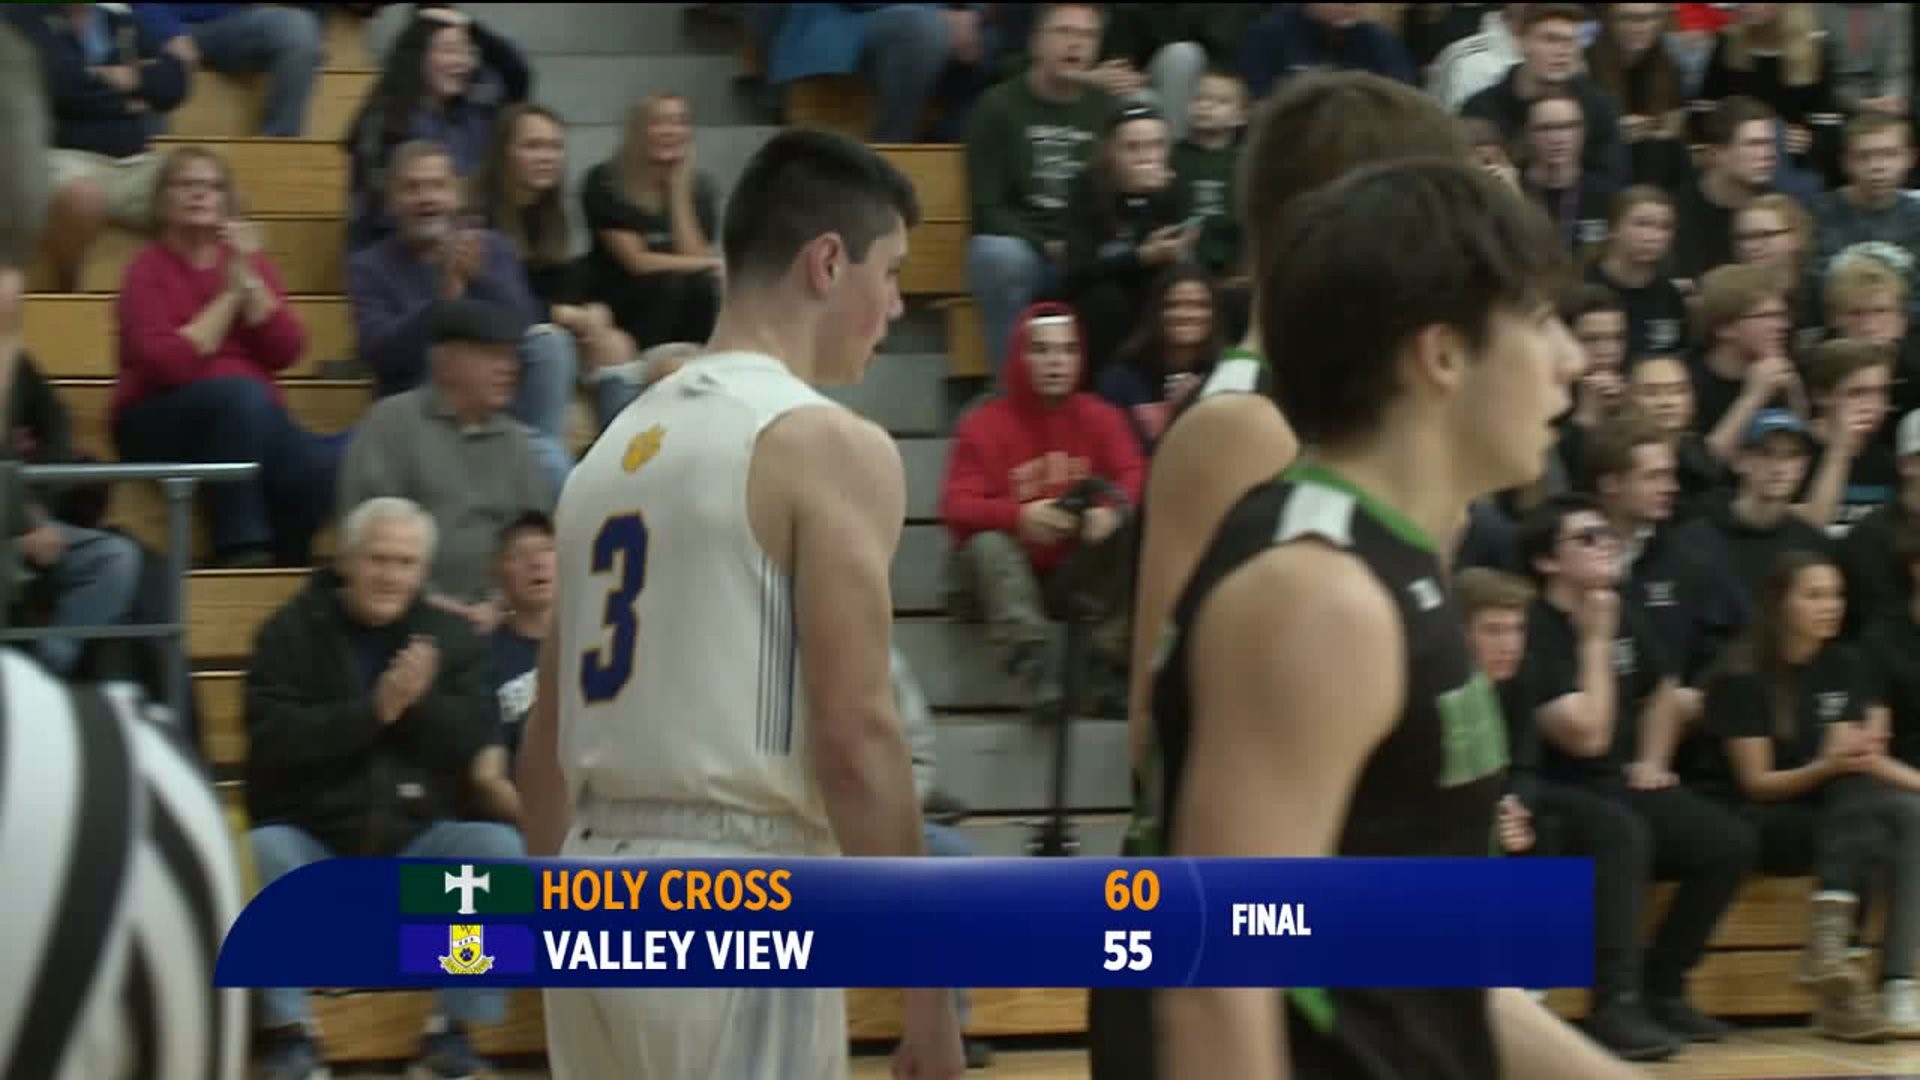 Holy Cross Boys Come Back to Beat Valley View 60-55